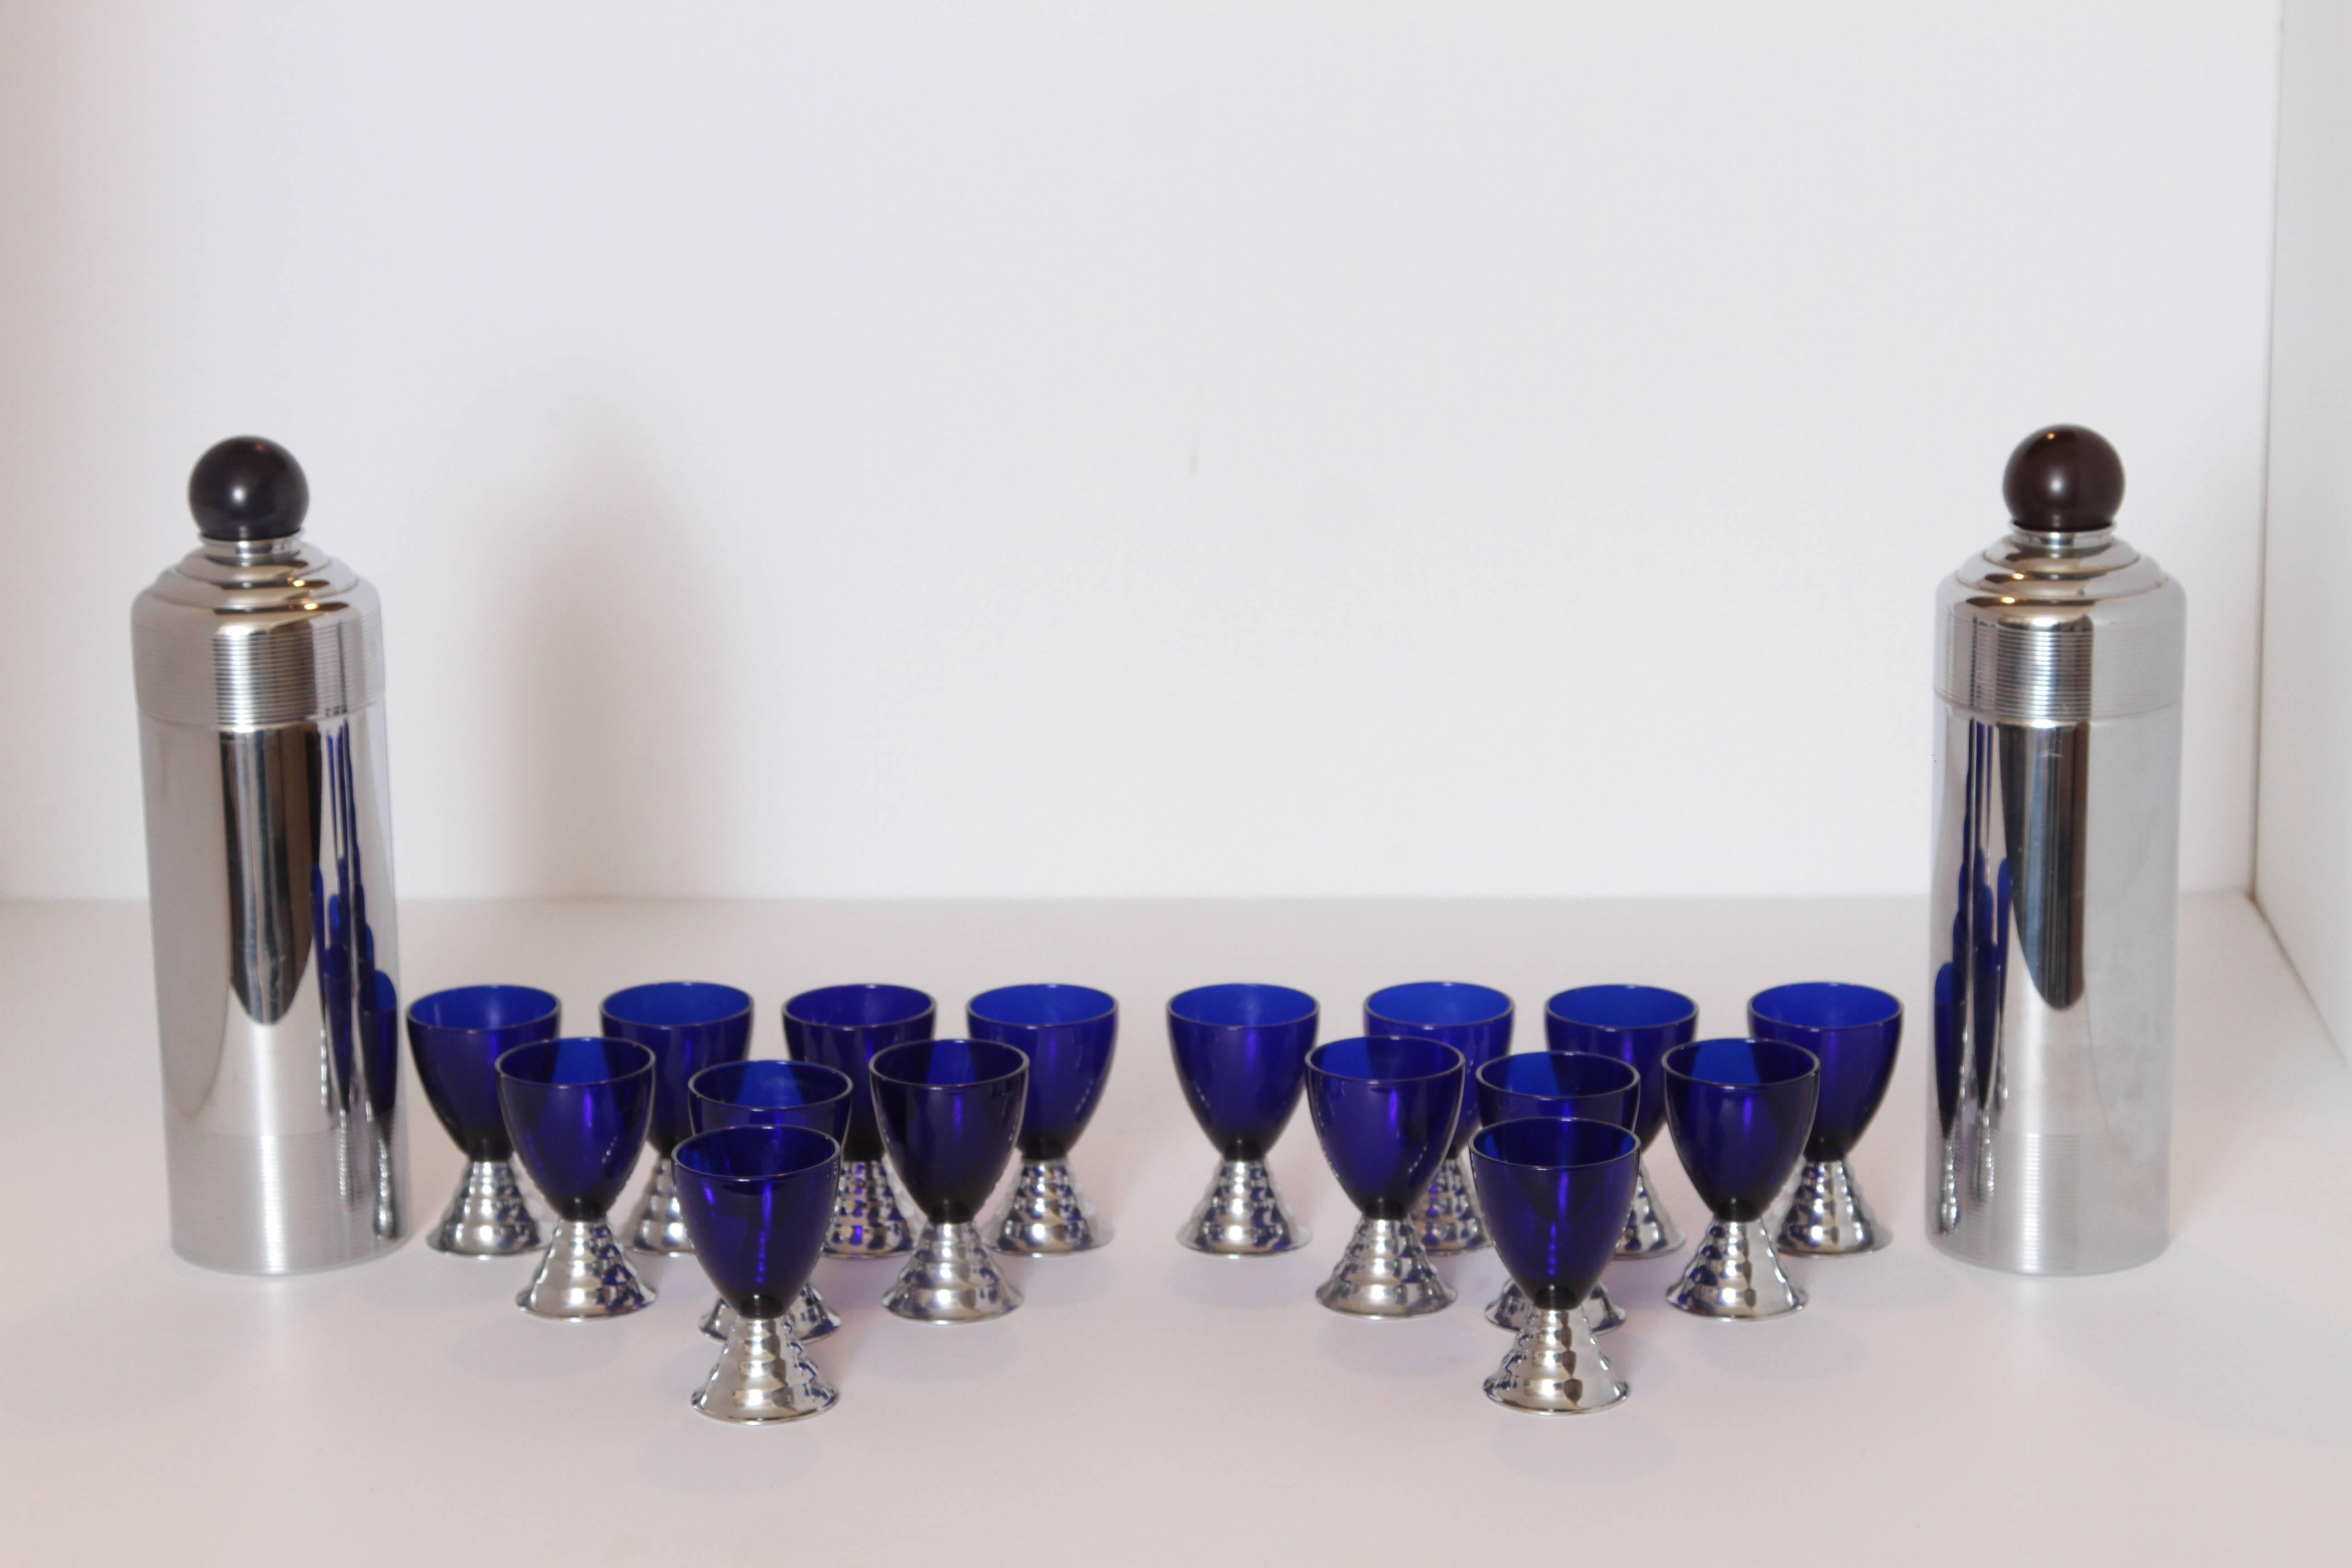 Machine Age Art Deco Chase Chrome Blue Moon Cocktail Sets (ONE SET SOLD)
PRICED PER SET

Removable deep amethyst Catalin jigger top.
Integral strainer in top cap. Nice cobalt/chrome cups. Excludes ring tray.
Set in good vintage used condition, all